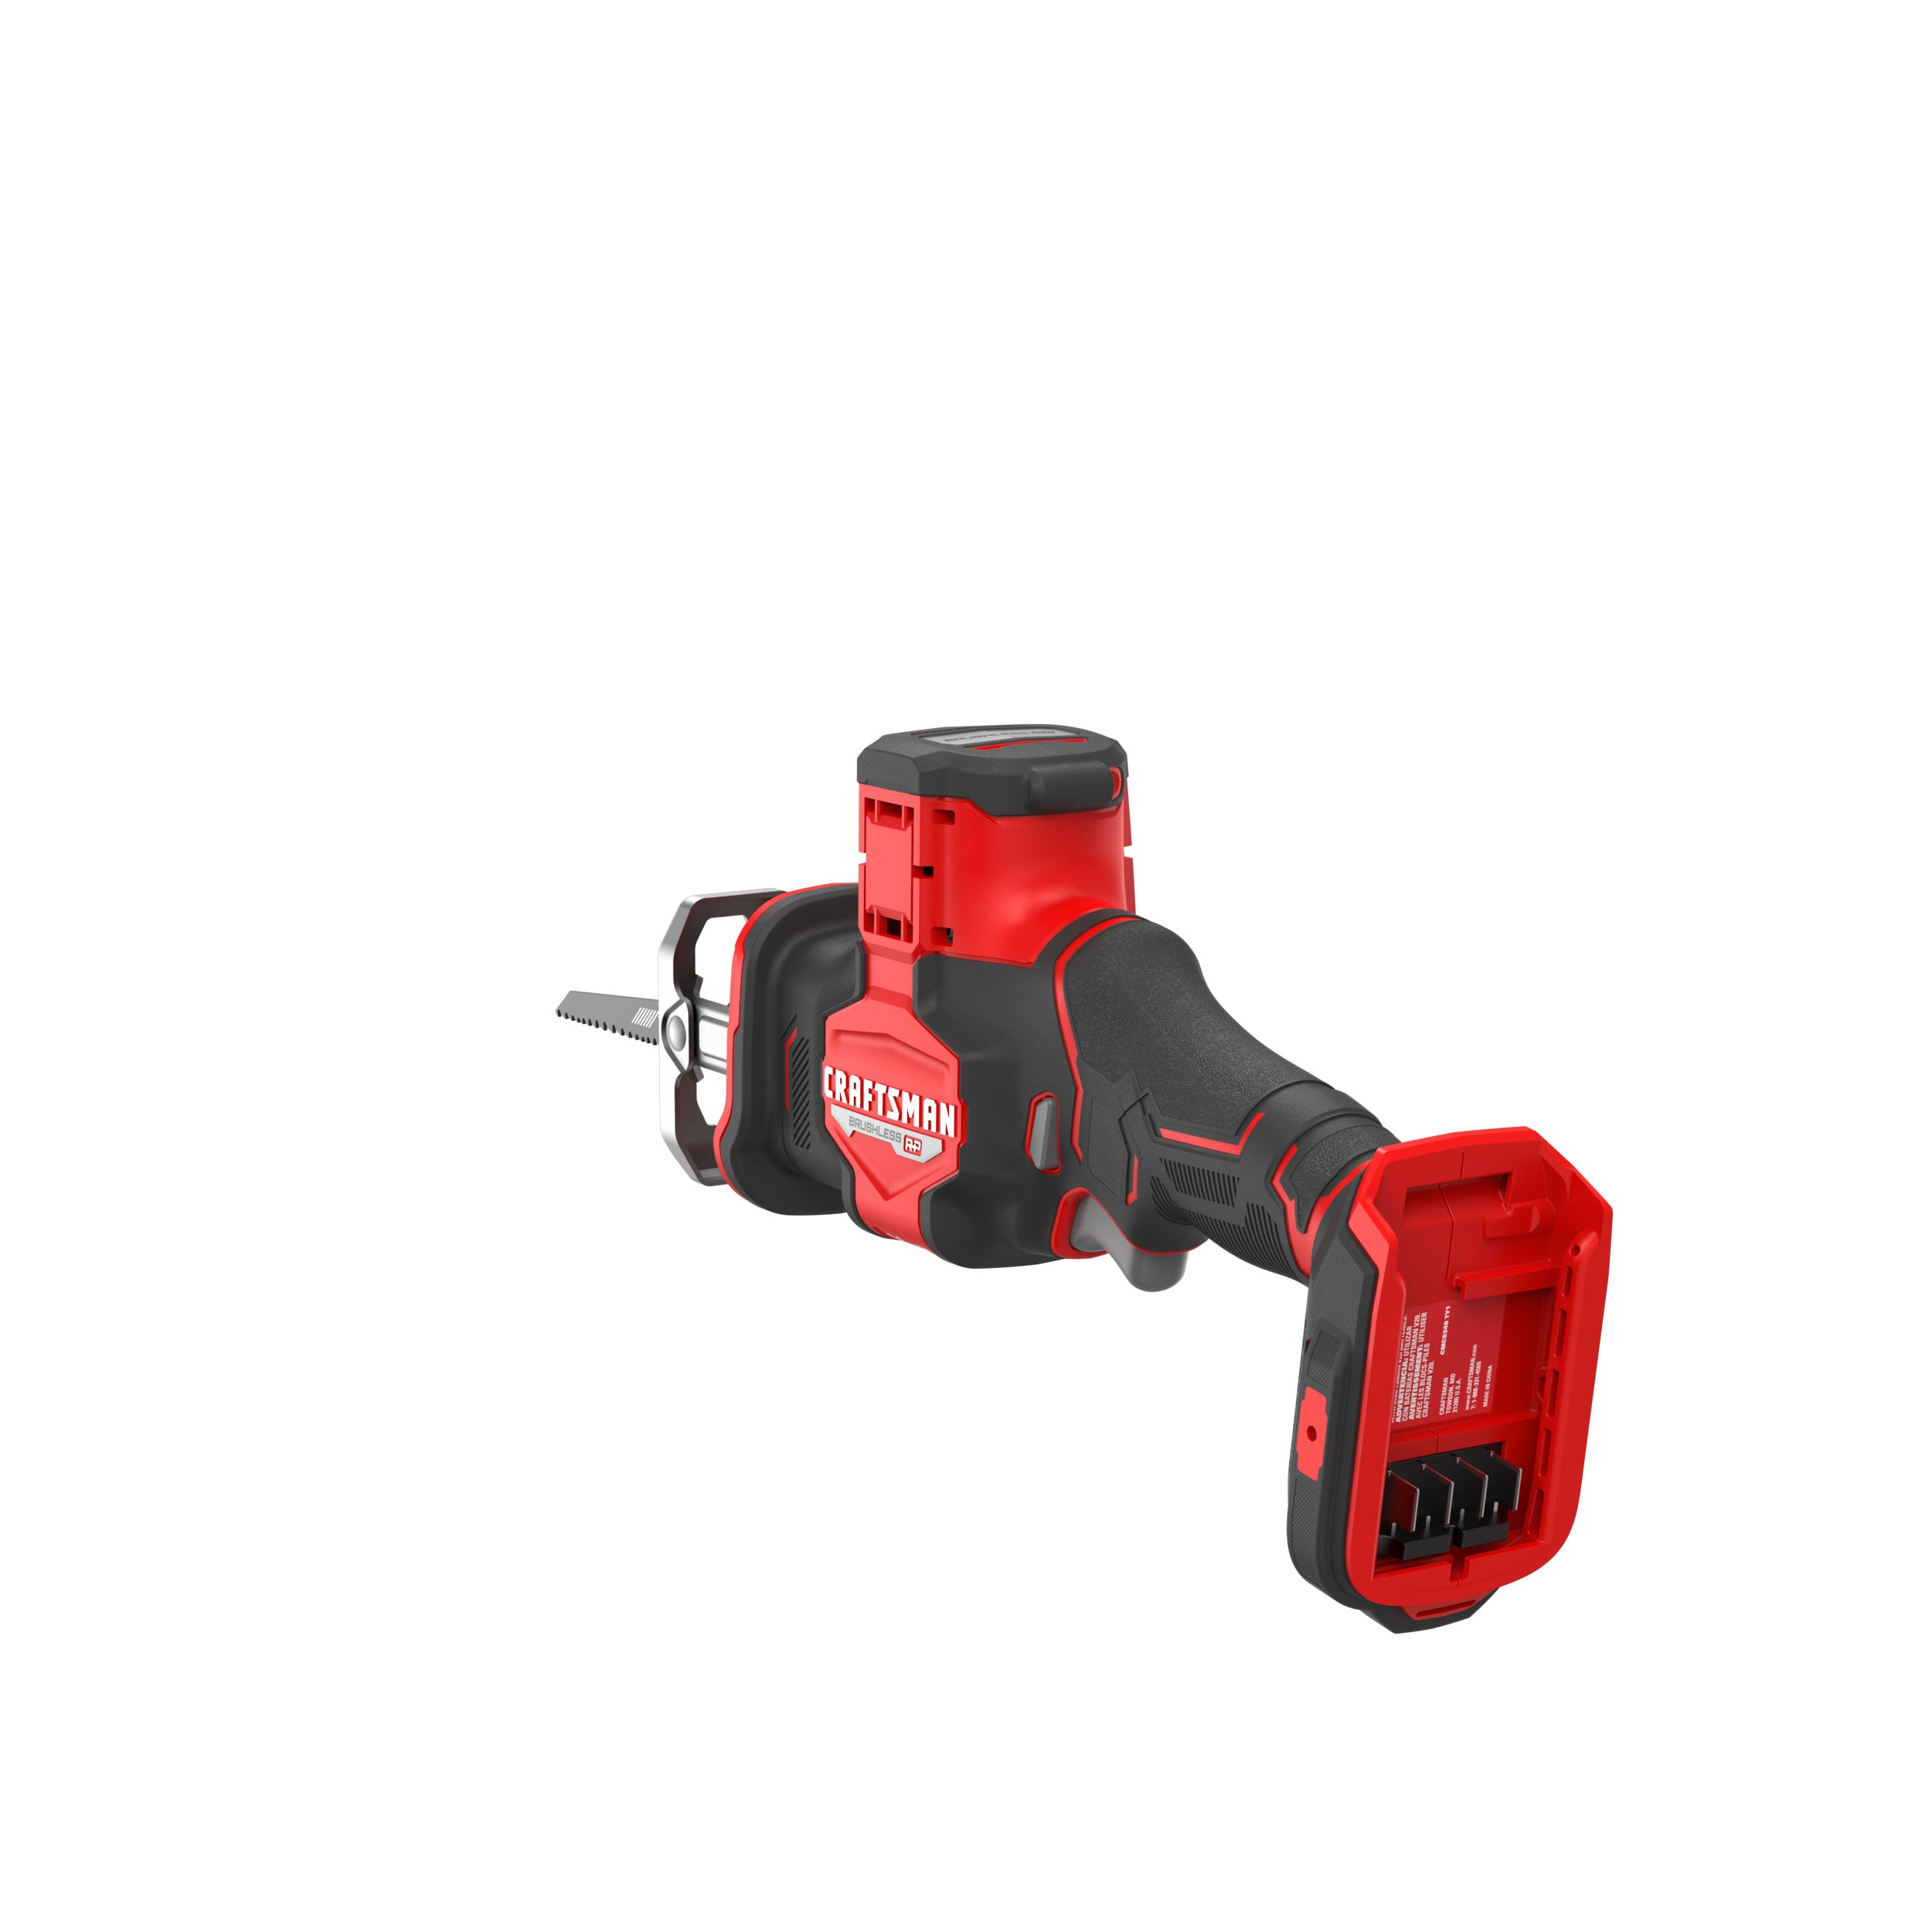 V20* BRUSHLESS RP™ Compact Reciprocating Saw (Tool Only) | CRAFTSMAN